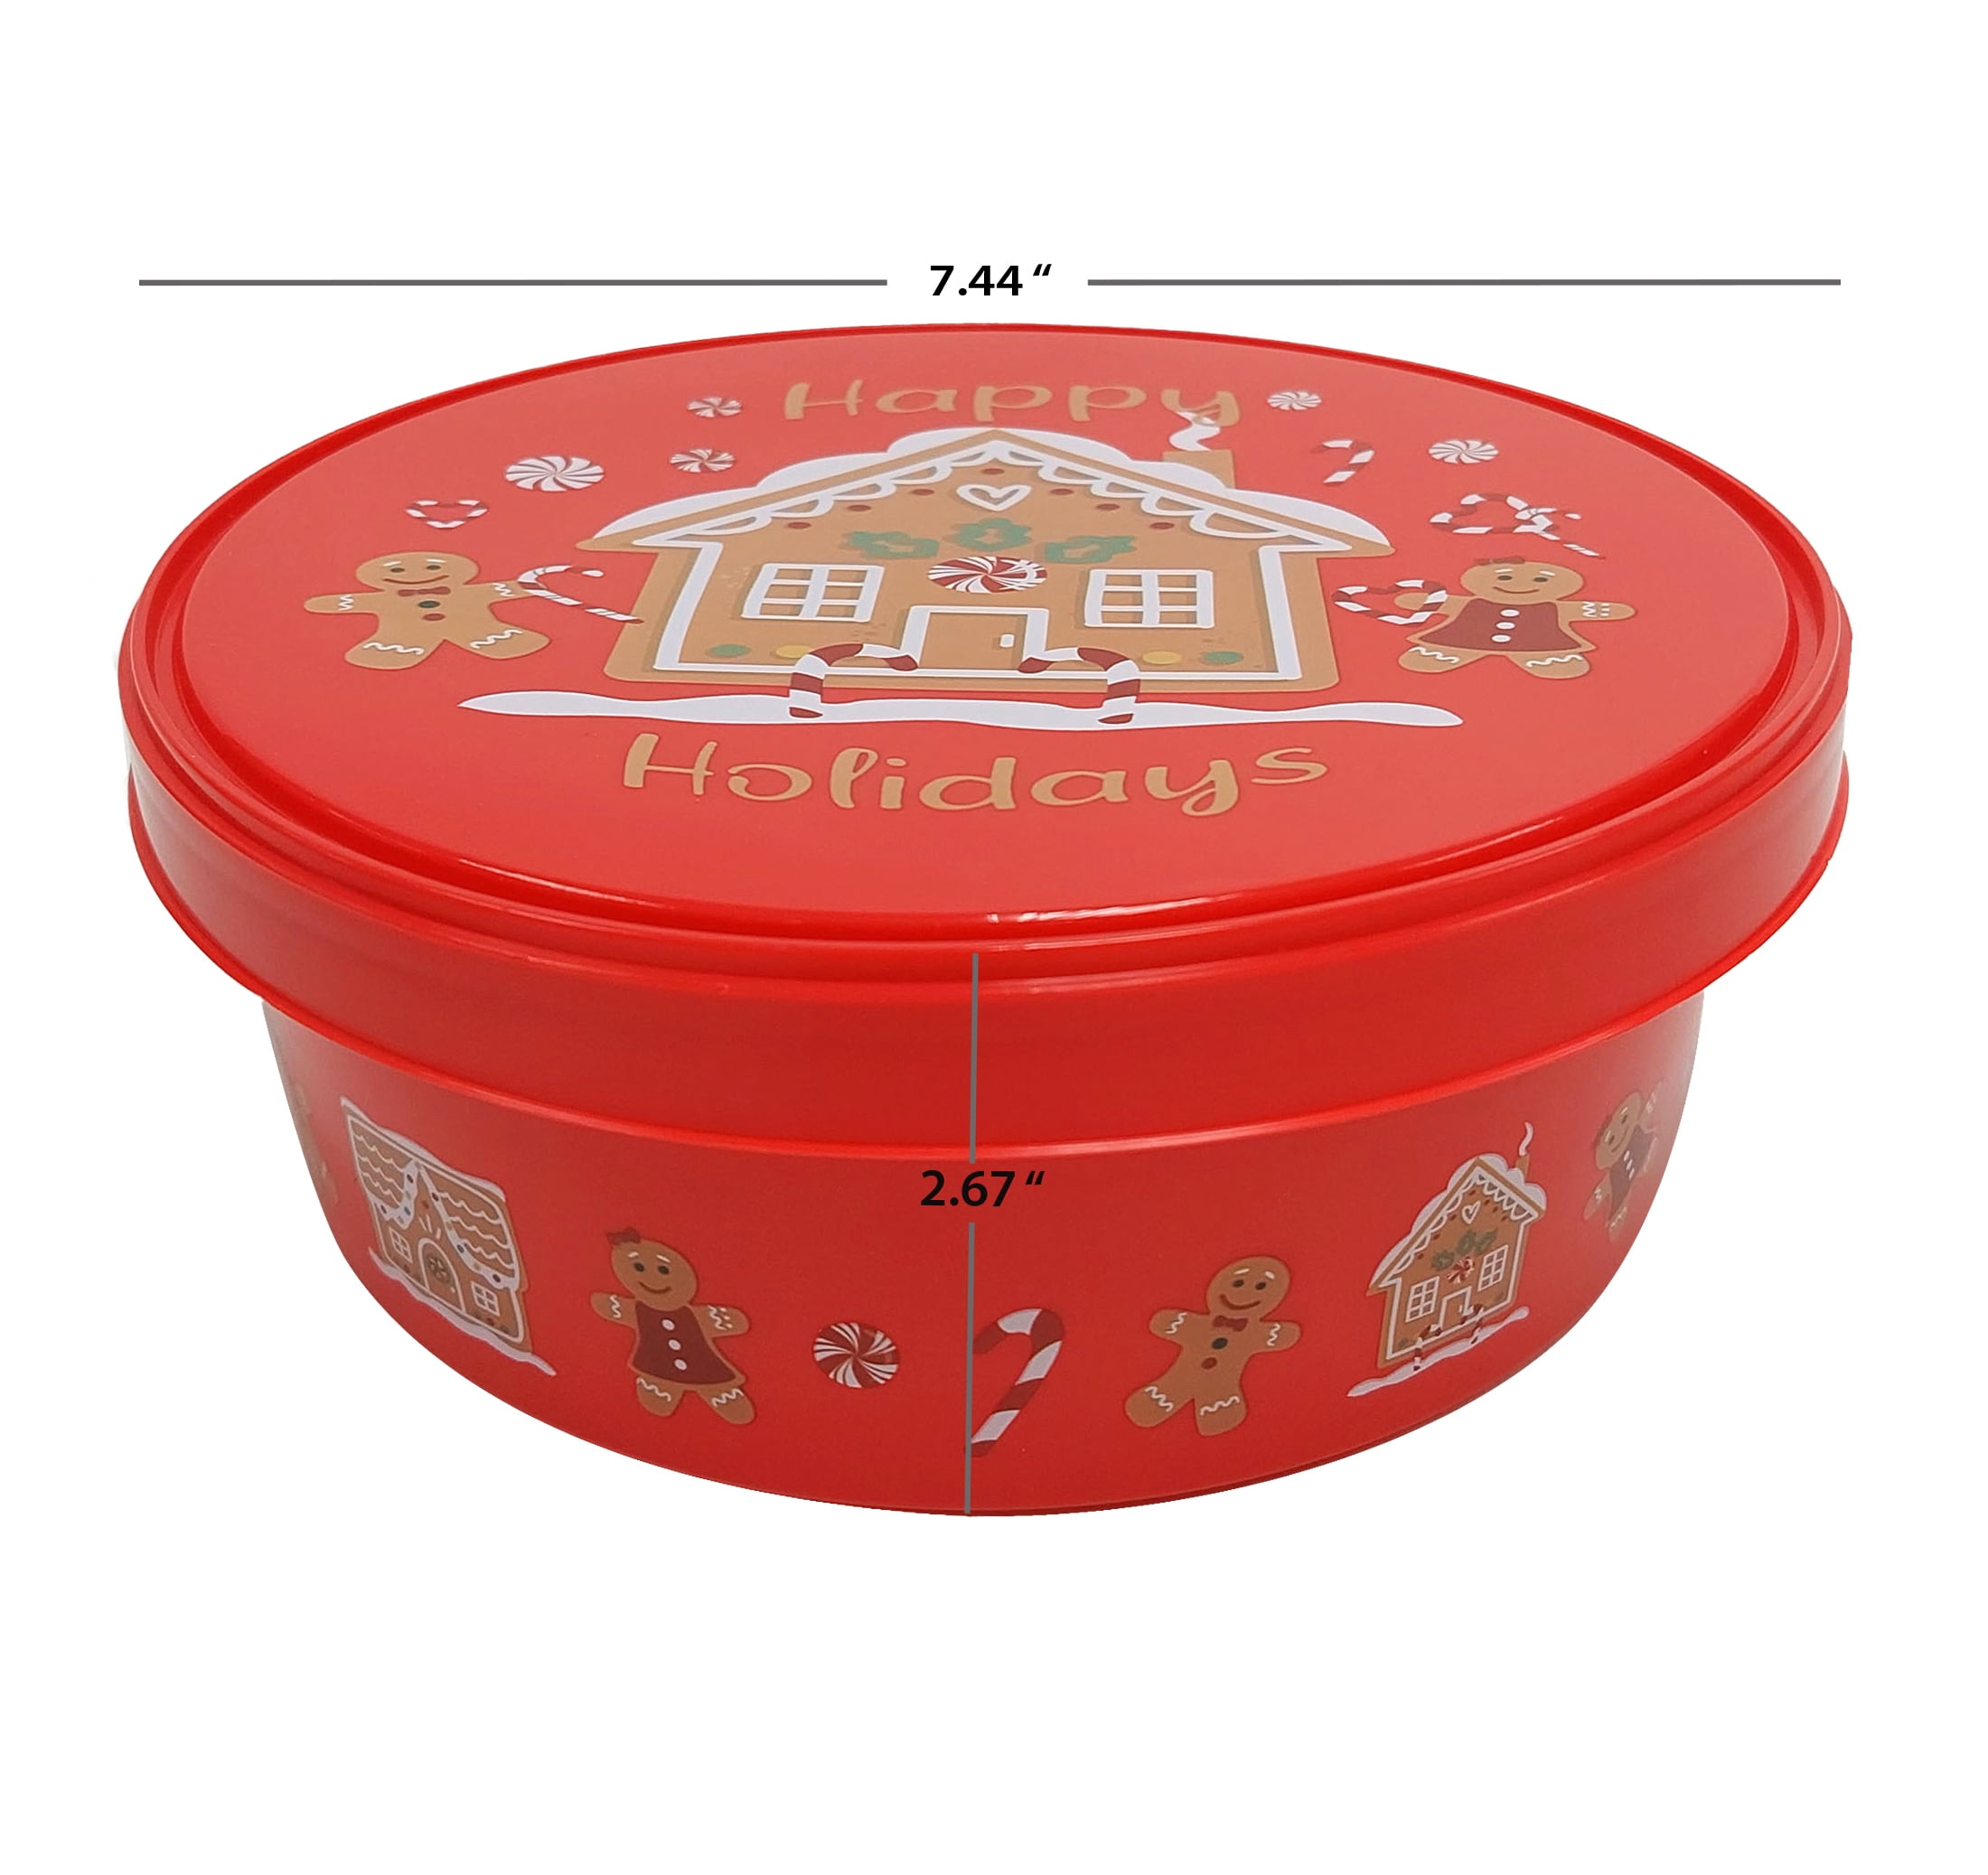 Christmas Round Plastic Cookie Containers with Lids Set of 2